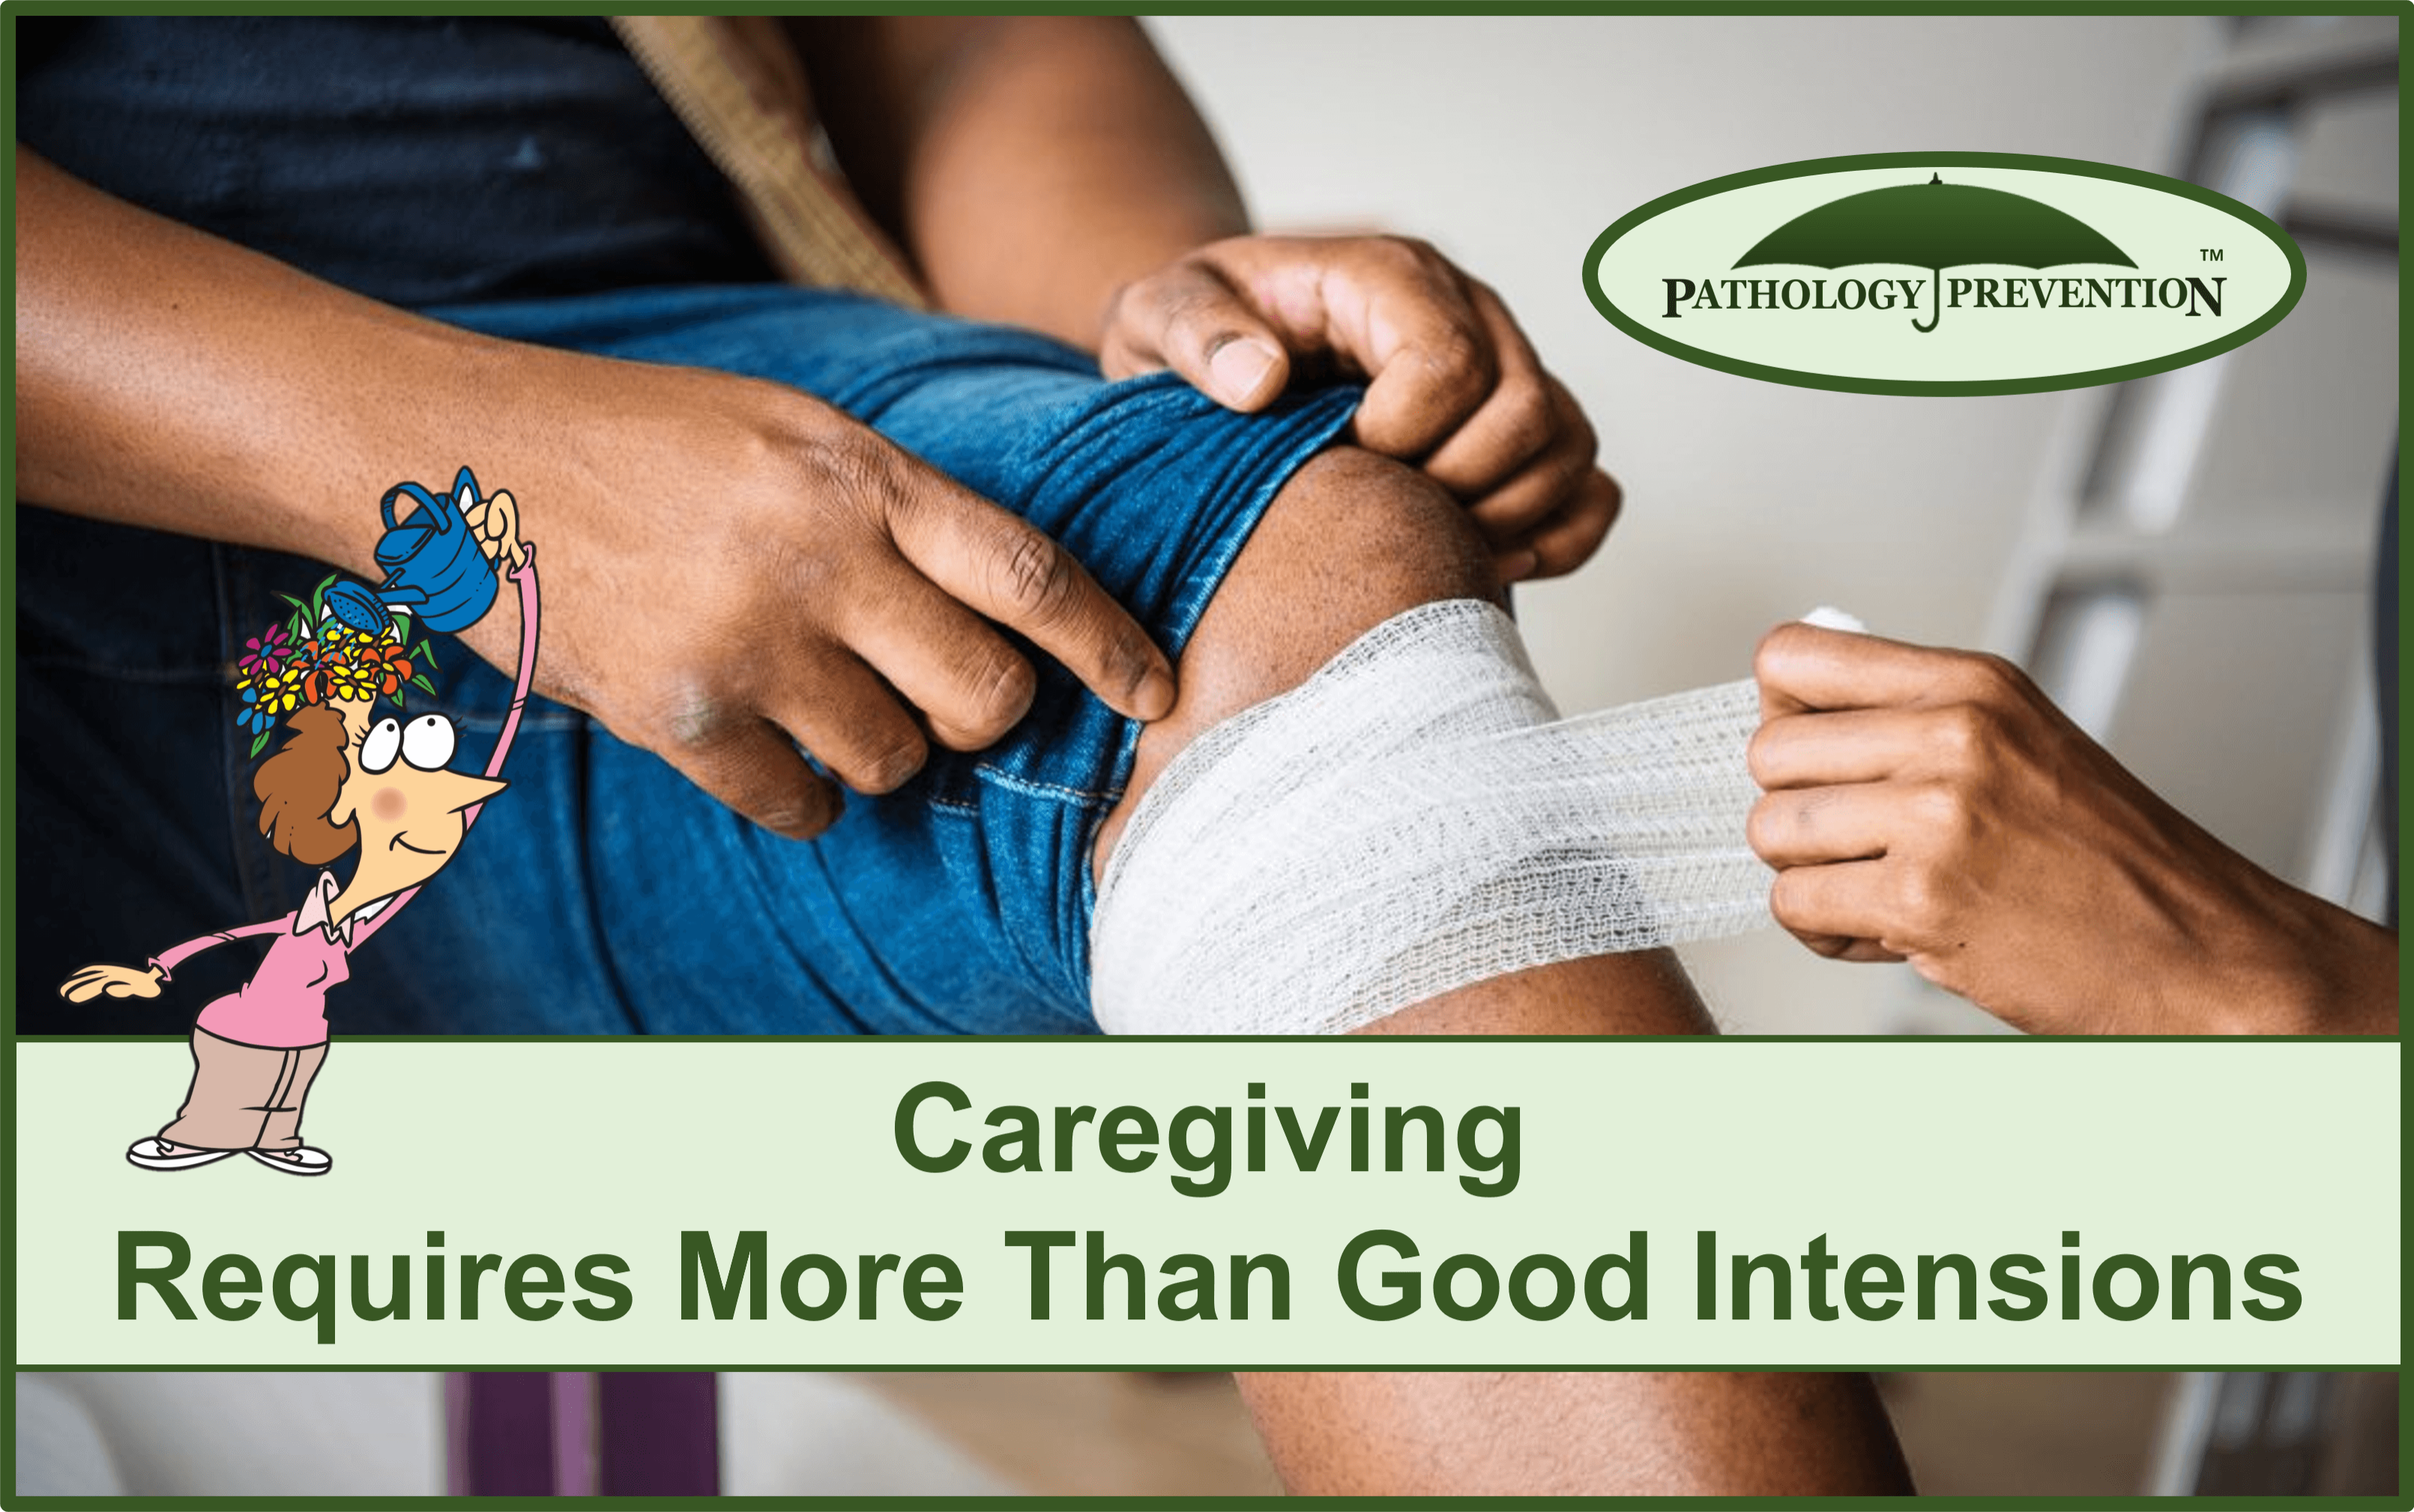 Pathology Prevention with Caregiving